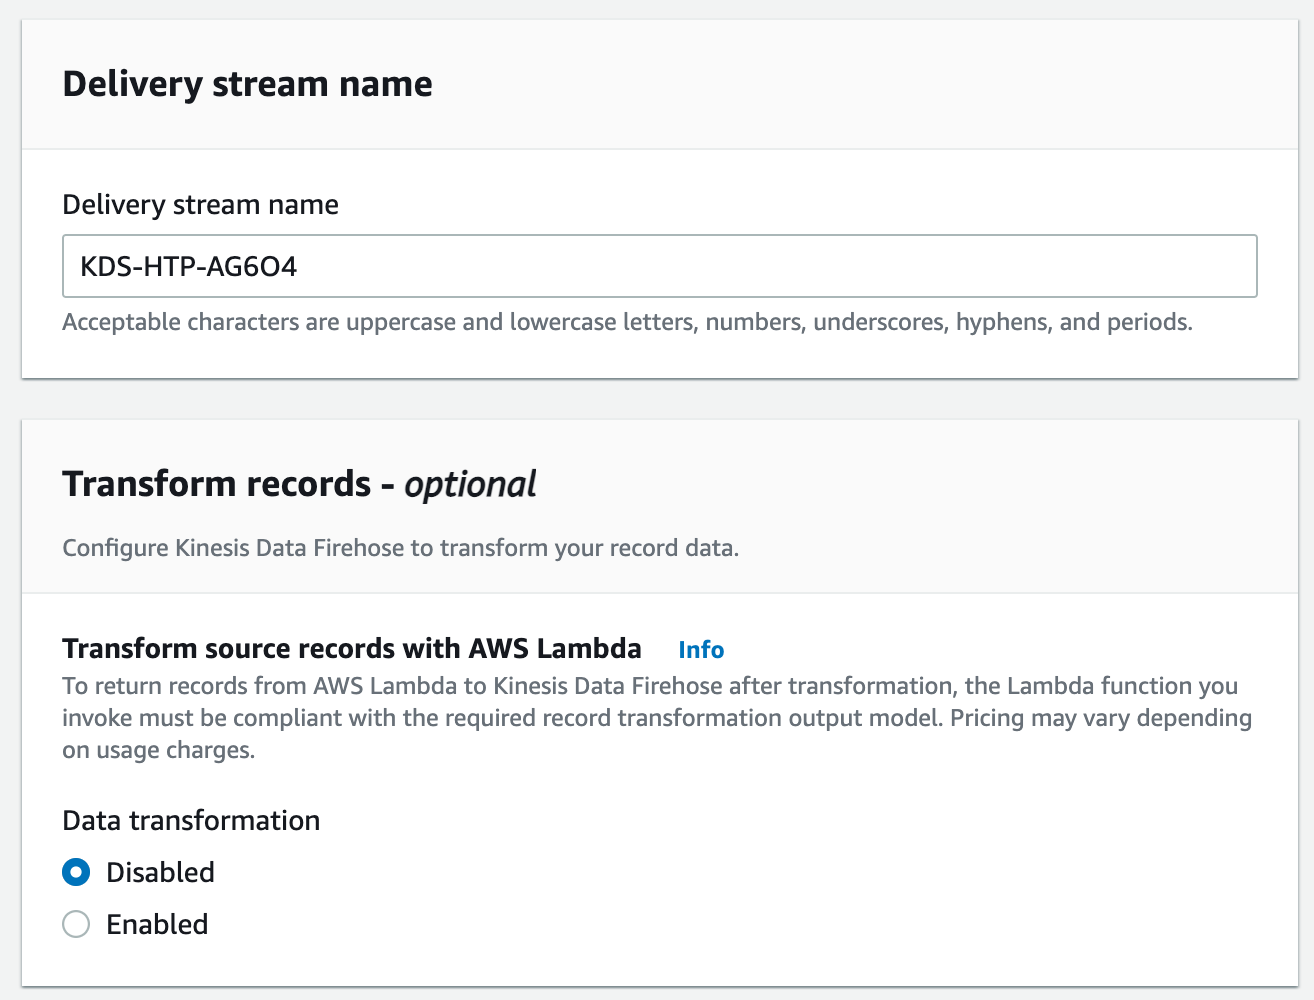 Kinesis Data Delivery Stream configuration, "Delivery stream name" and "Transform records."